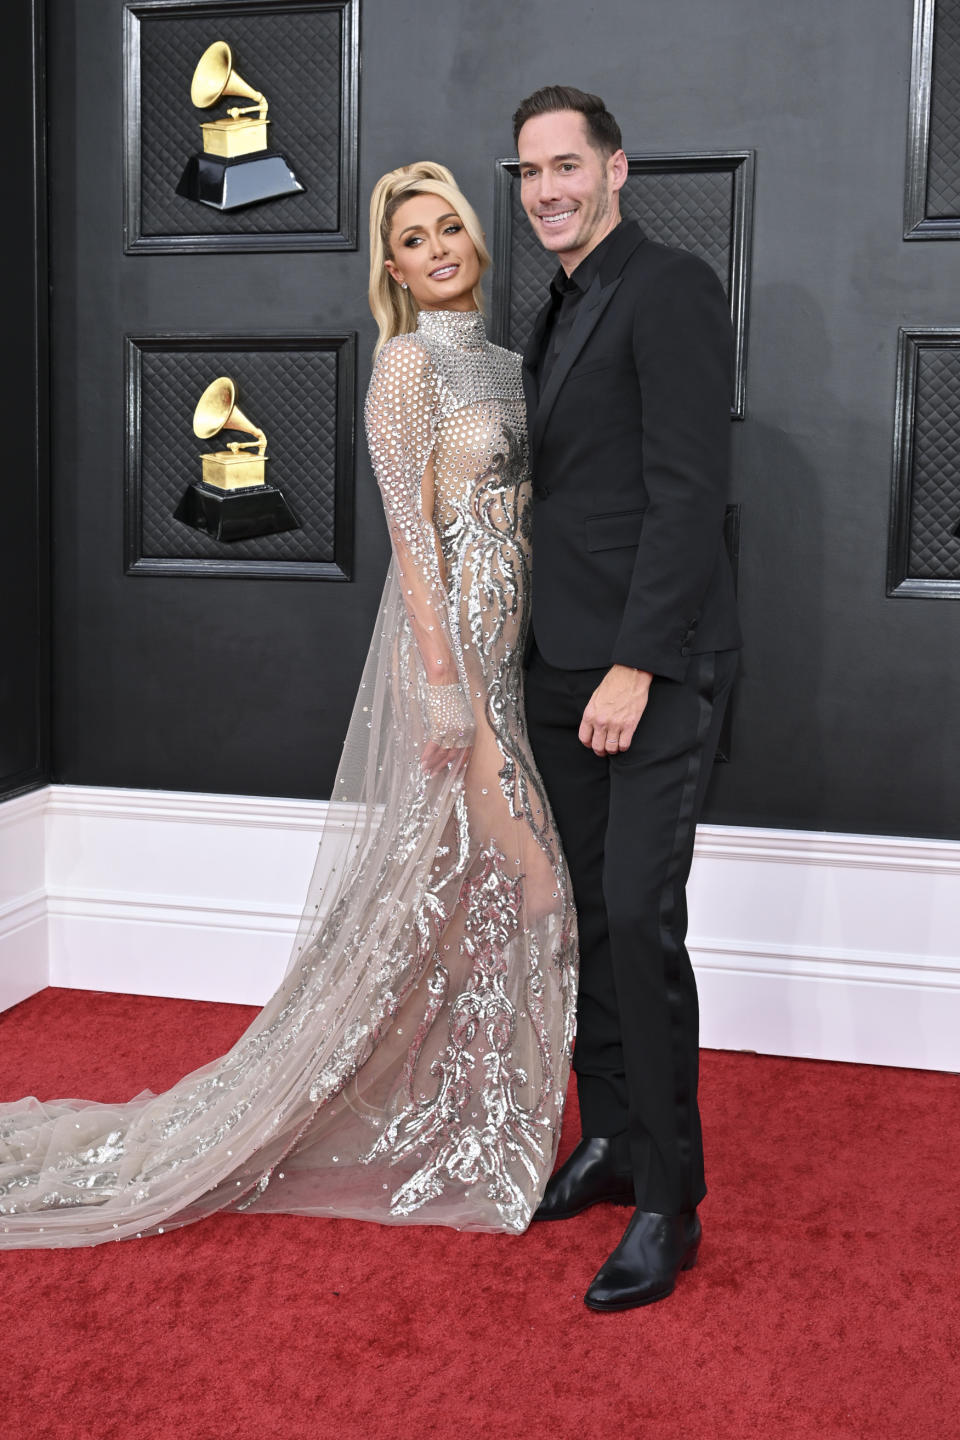 Paris Hilton and Carter Reum at the 64th Annual Grammy Awards held at the MGM Grand Garden Arena on April 3rd, 2022 in Las Vegas, Nevada. (Photo by Brian Friedman/Variety/Penske Media via Getty Images)